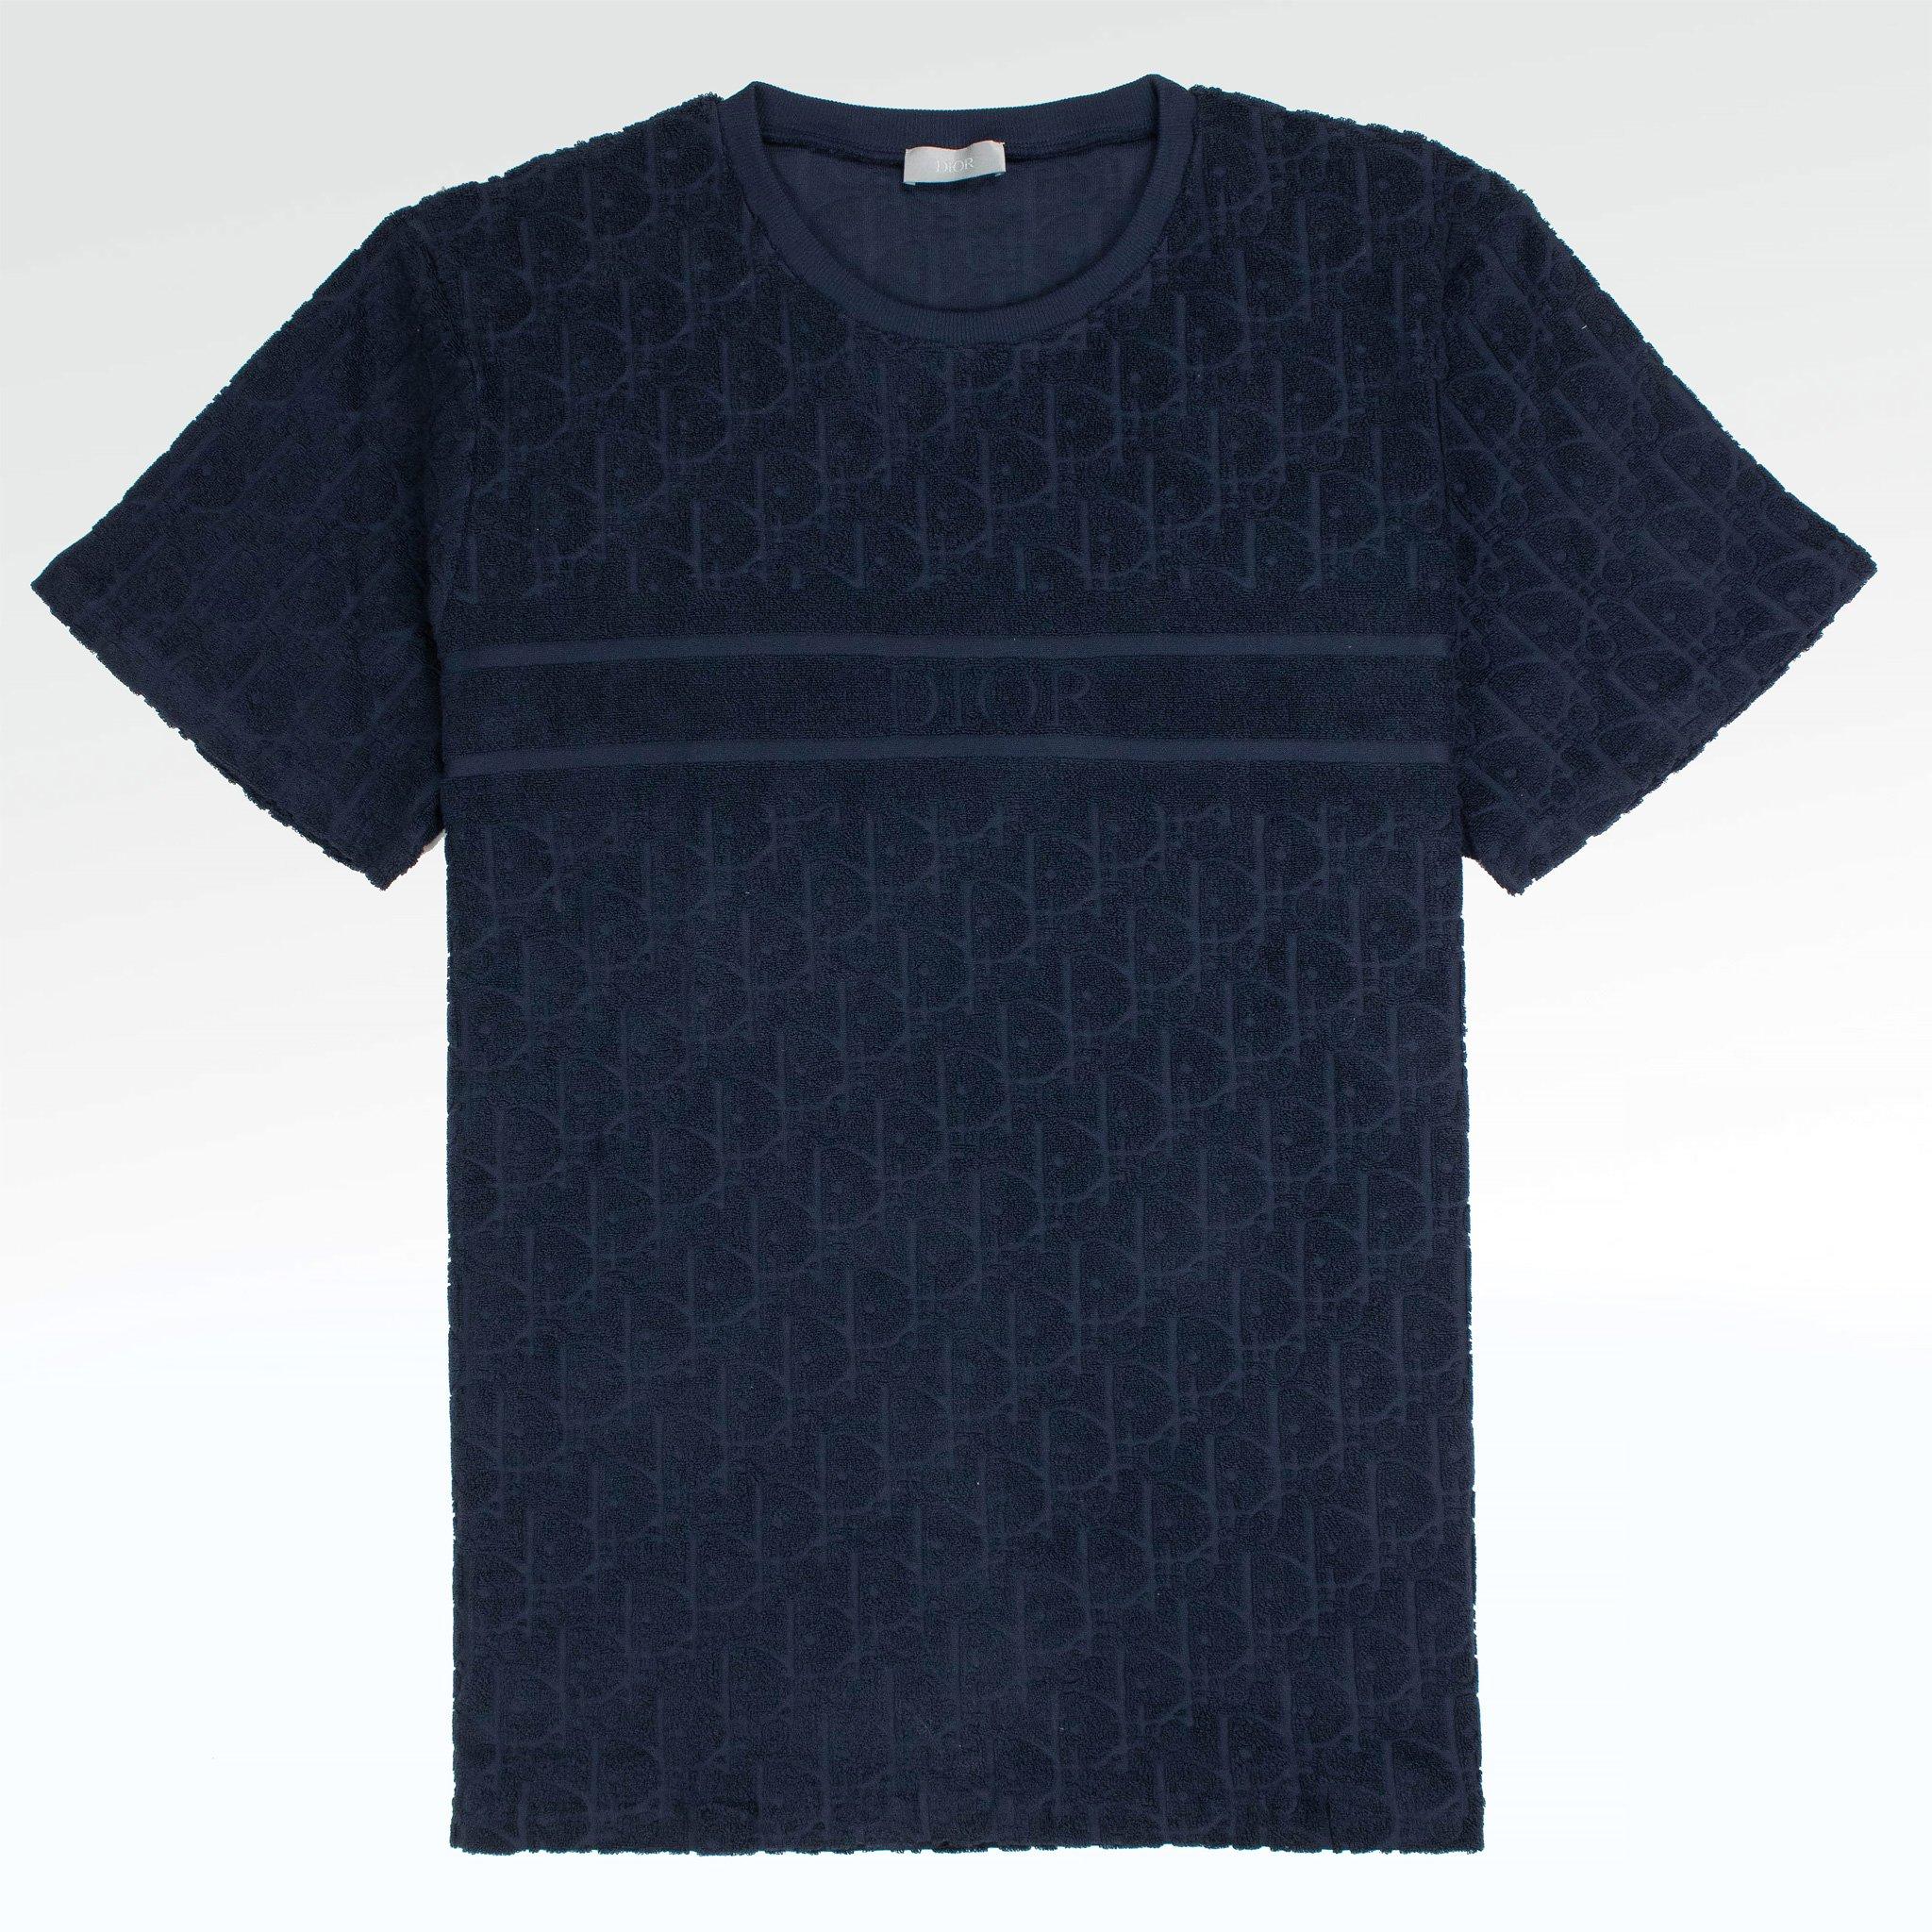 Dior Cotton Oblique Towelling Navy T Shirt in Blue for Men - Lyst